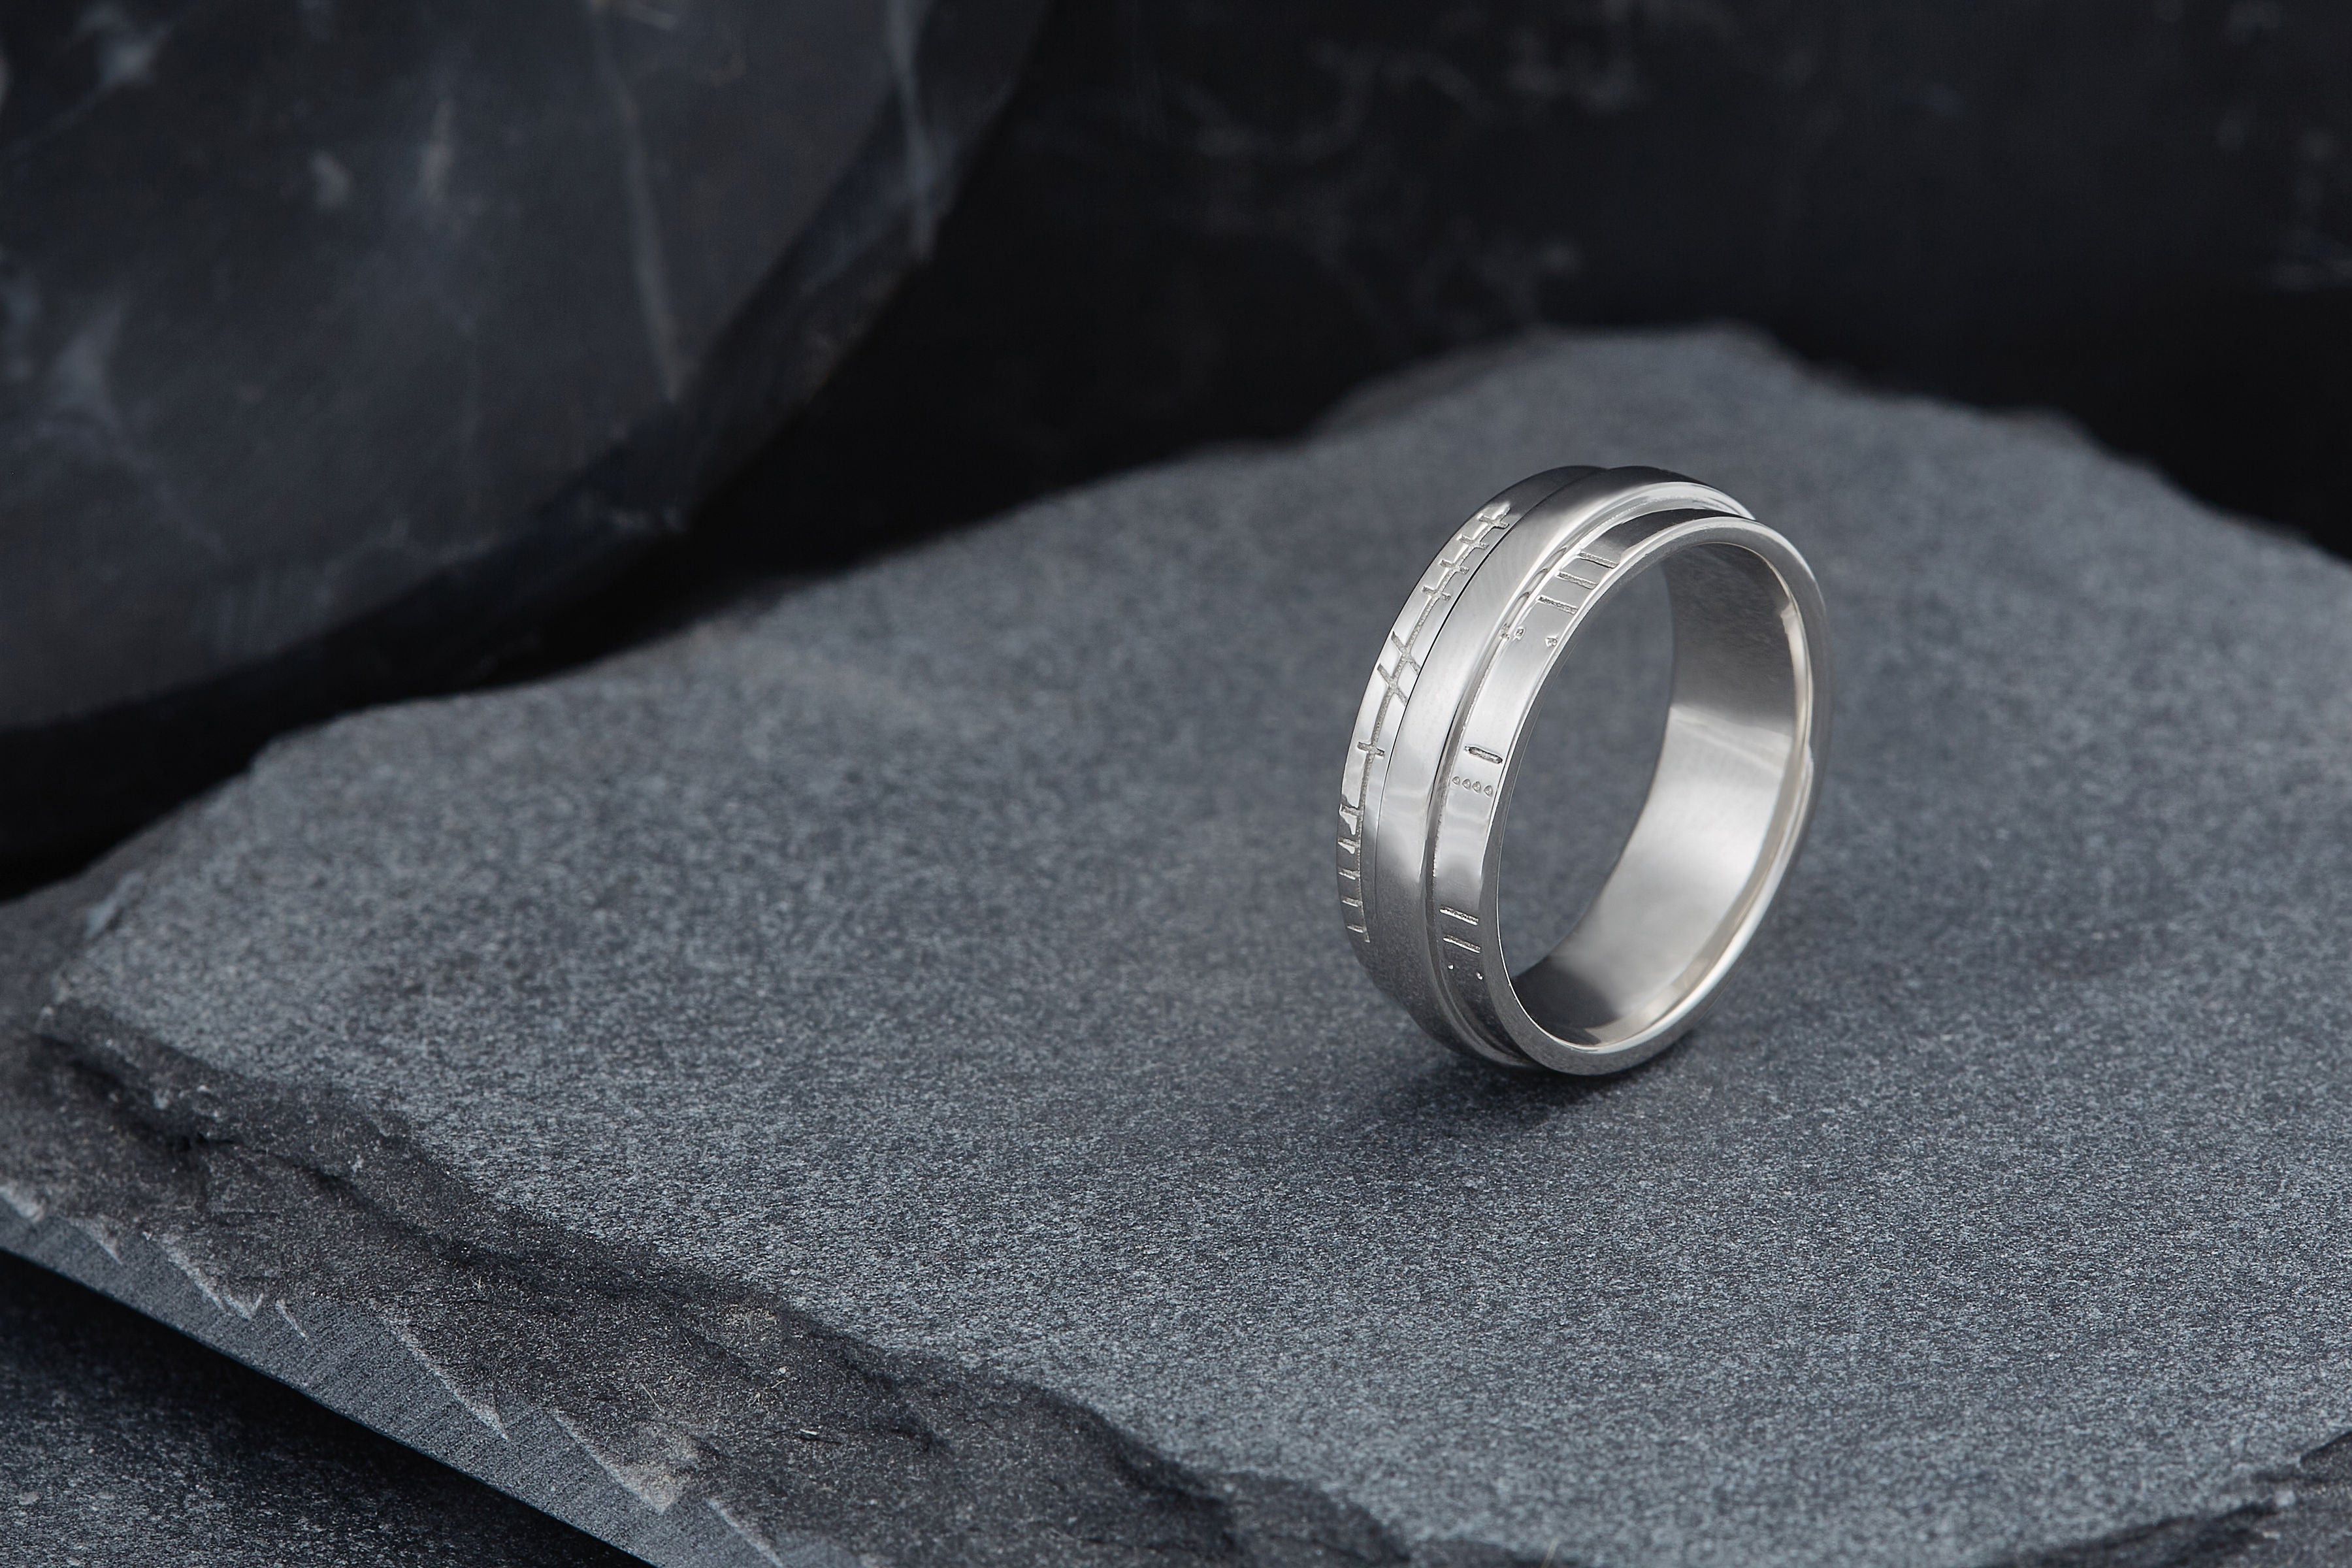 Men's wedding band with Mayan symbols and Ogham engraving